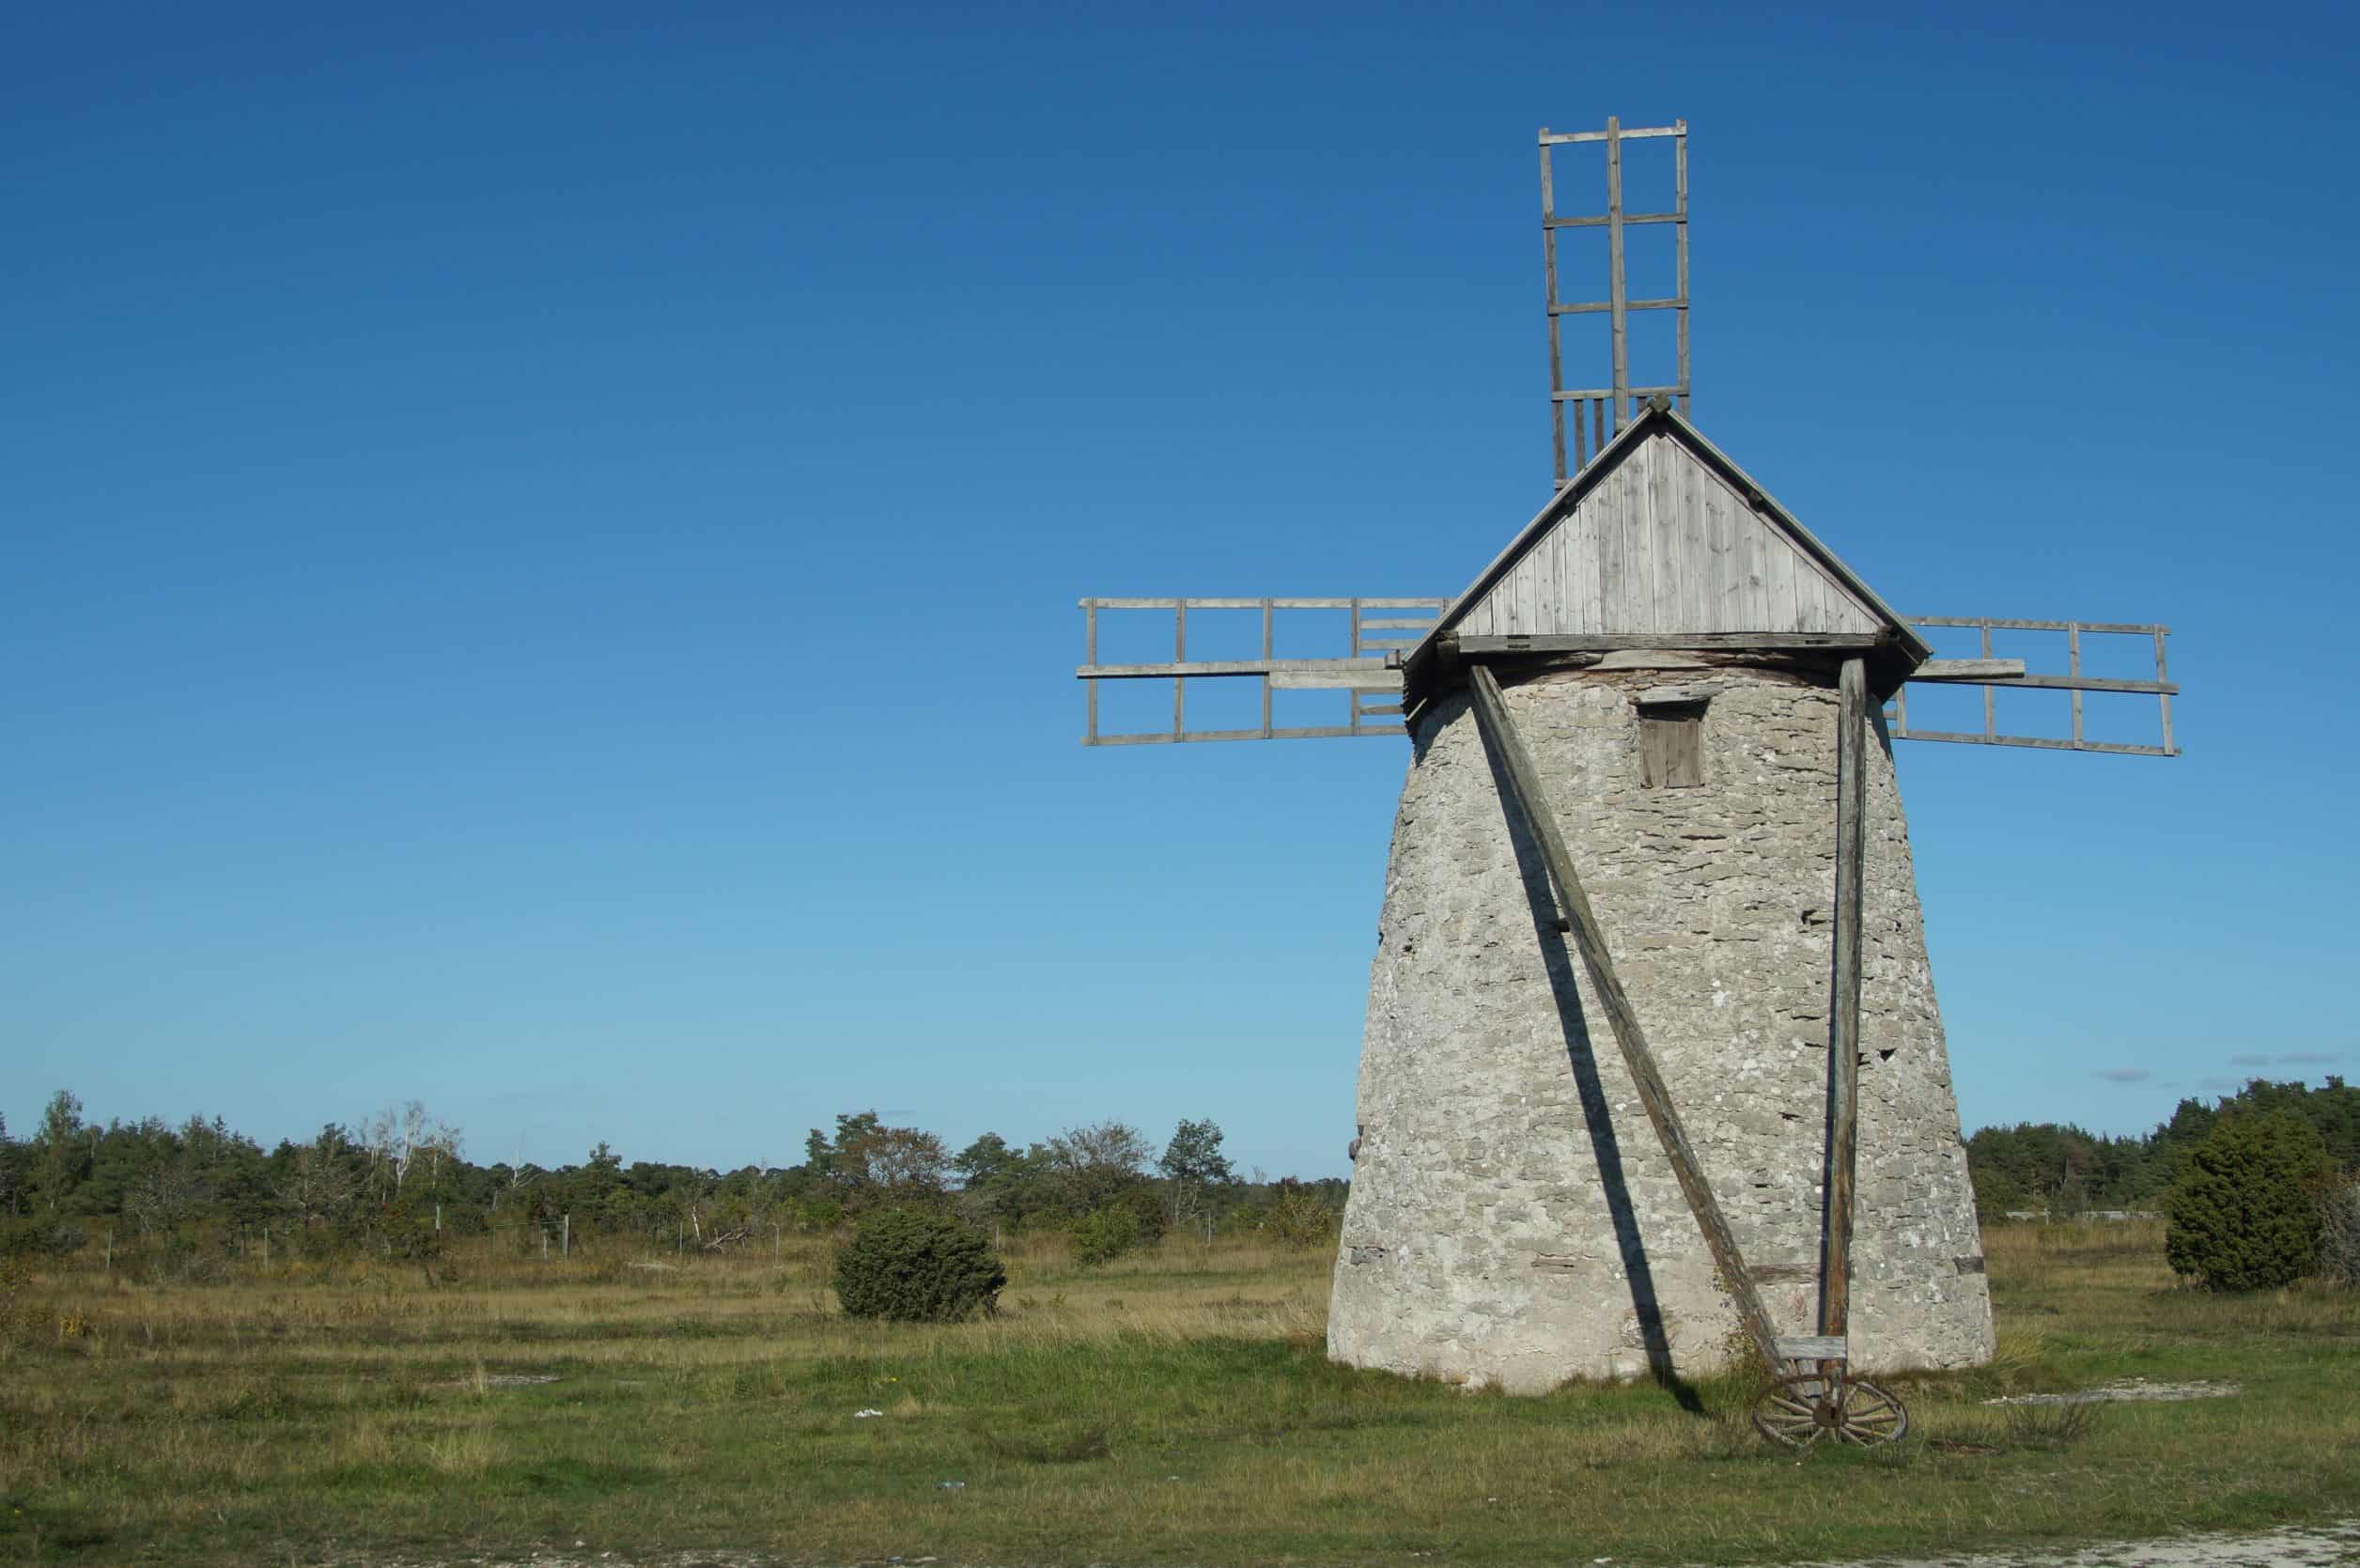 Image of a windmill on a field